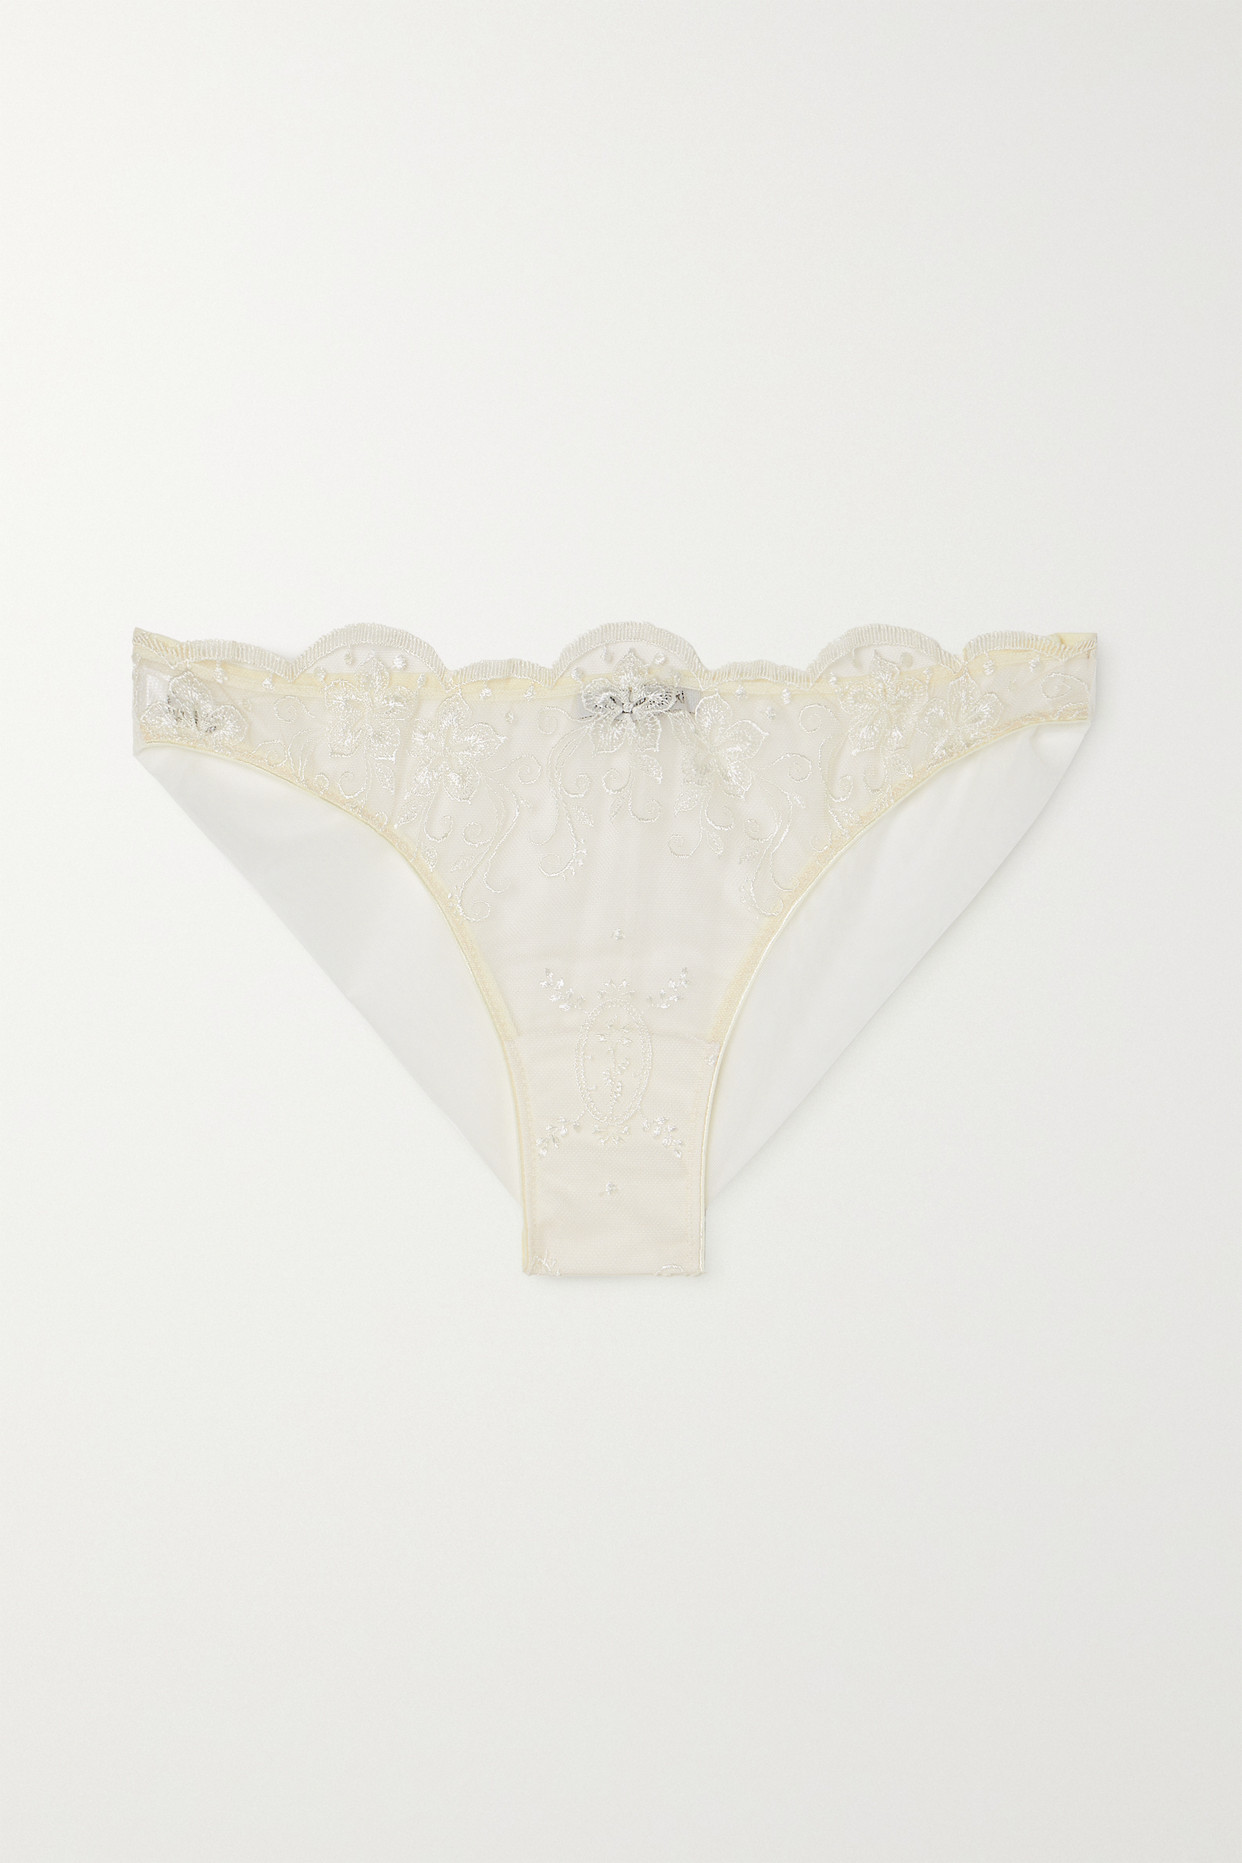 + Net Sustain Tubereuse Blanche Scalloped Embroidered Tulle Brazilian Briefs